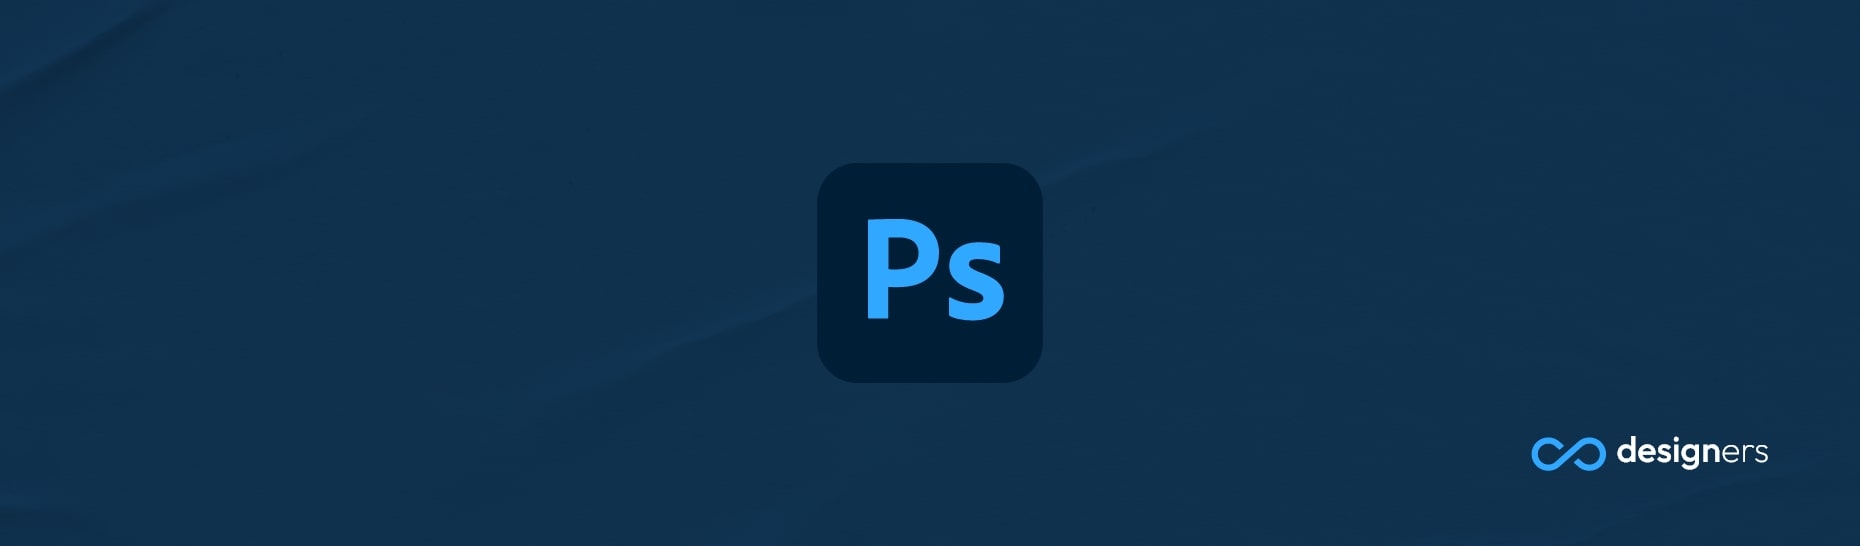 Can I Download Adobe Photoshop for Free?